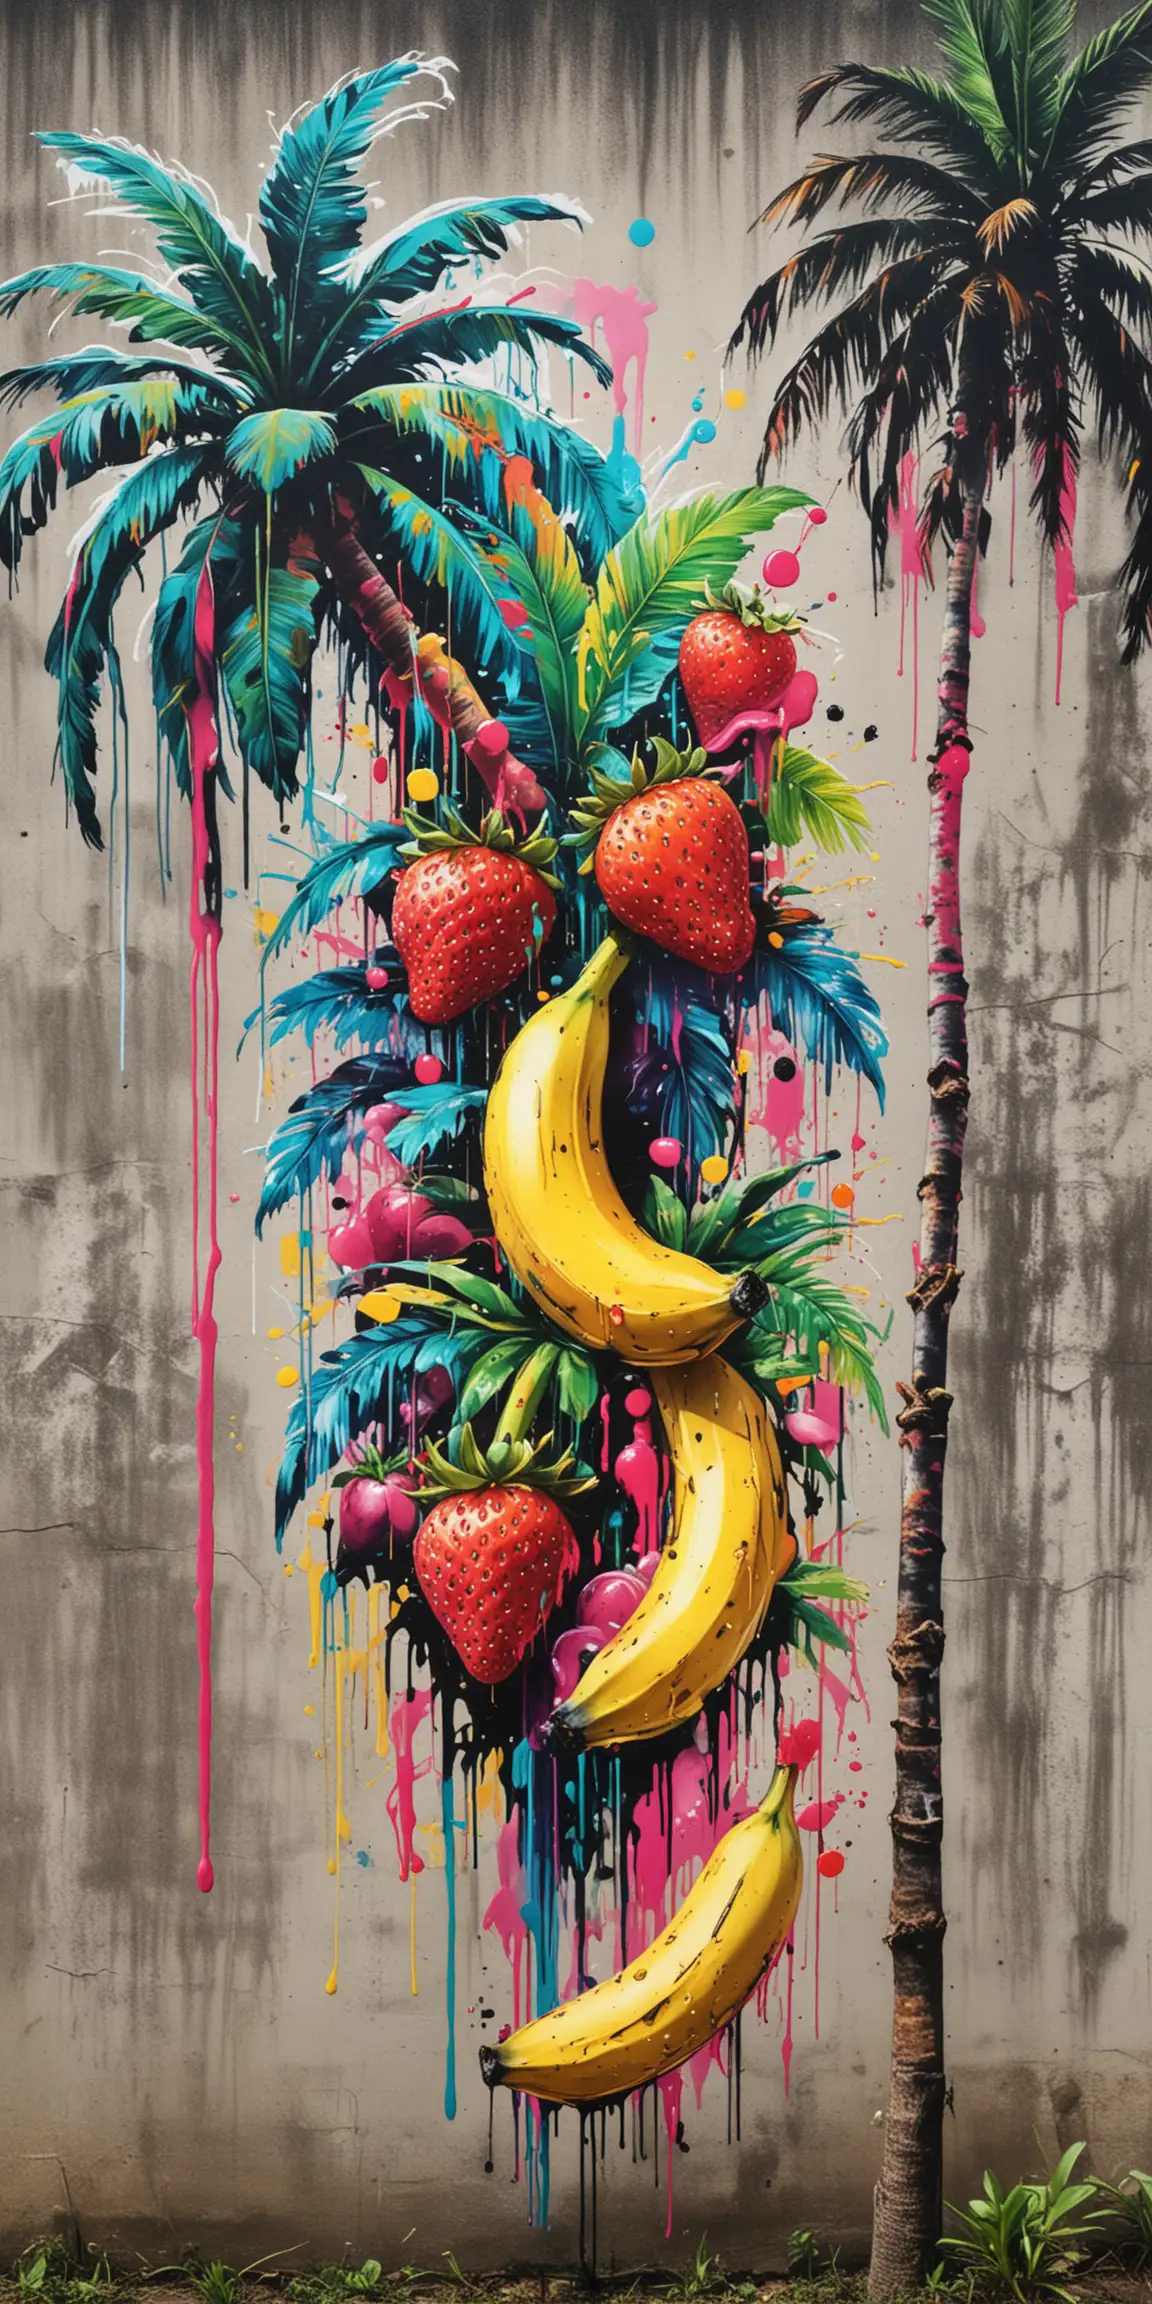 80's graffiti tropical bananas and strawberries and palm trees
paint drips